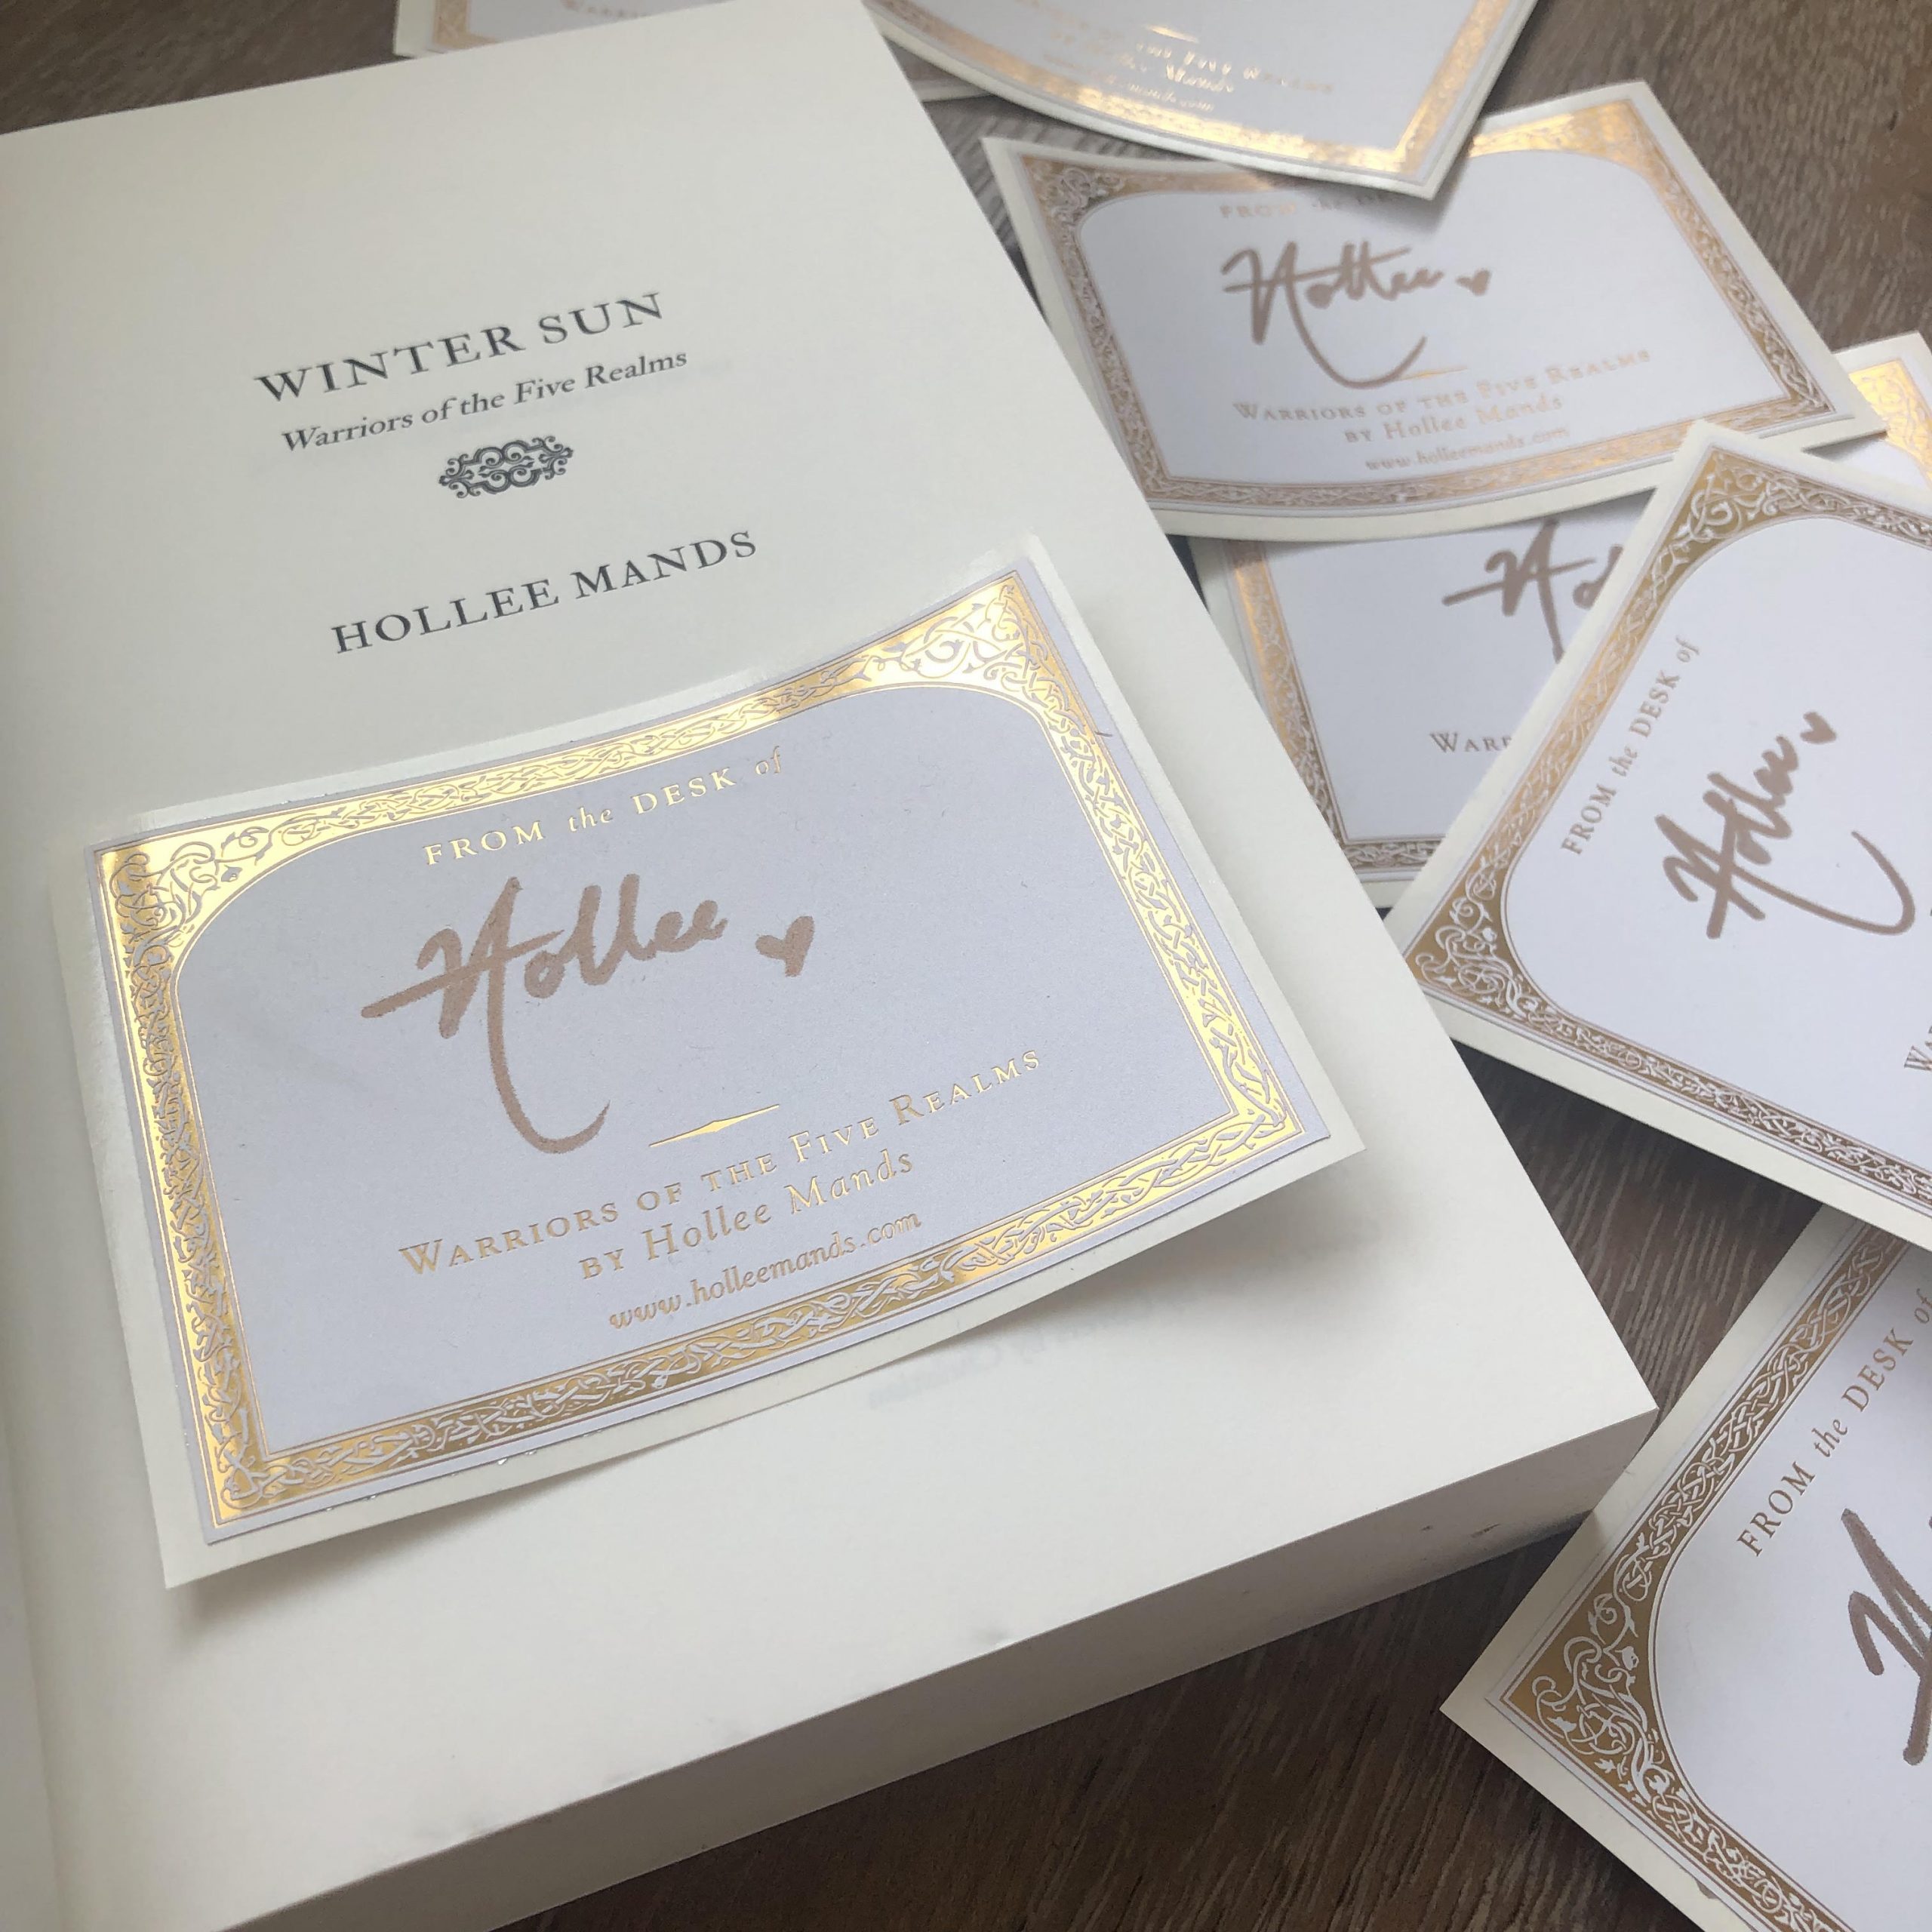 Bookplates - Hollee Mands